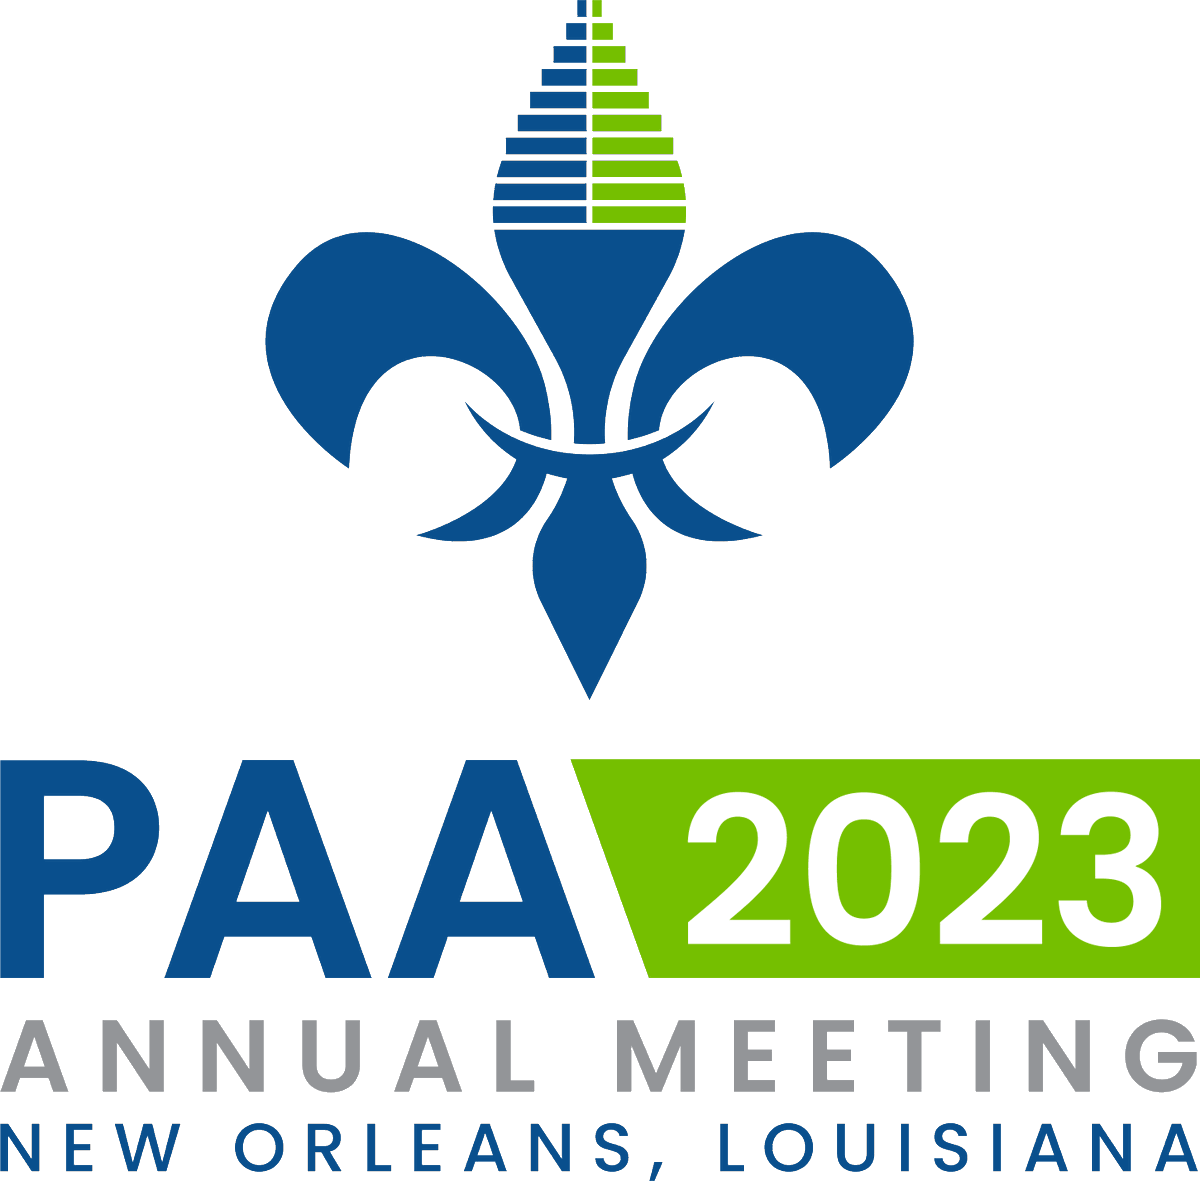 The preliminary program for #PAA2023 is available! ow.ly/ejfy50MSygF

Will we see you in New Orleans?!